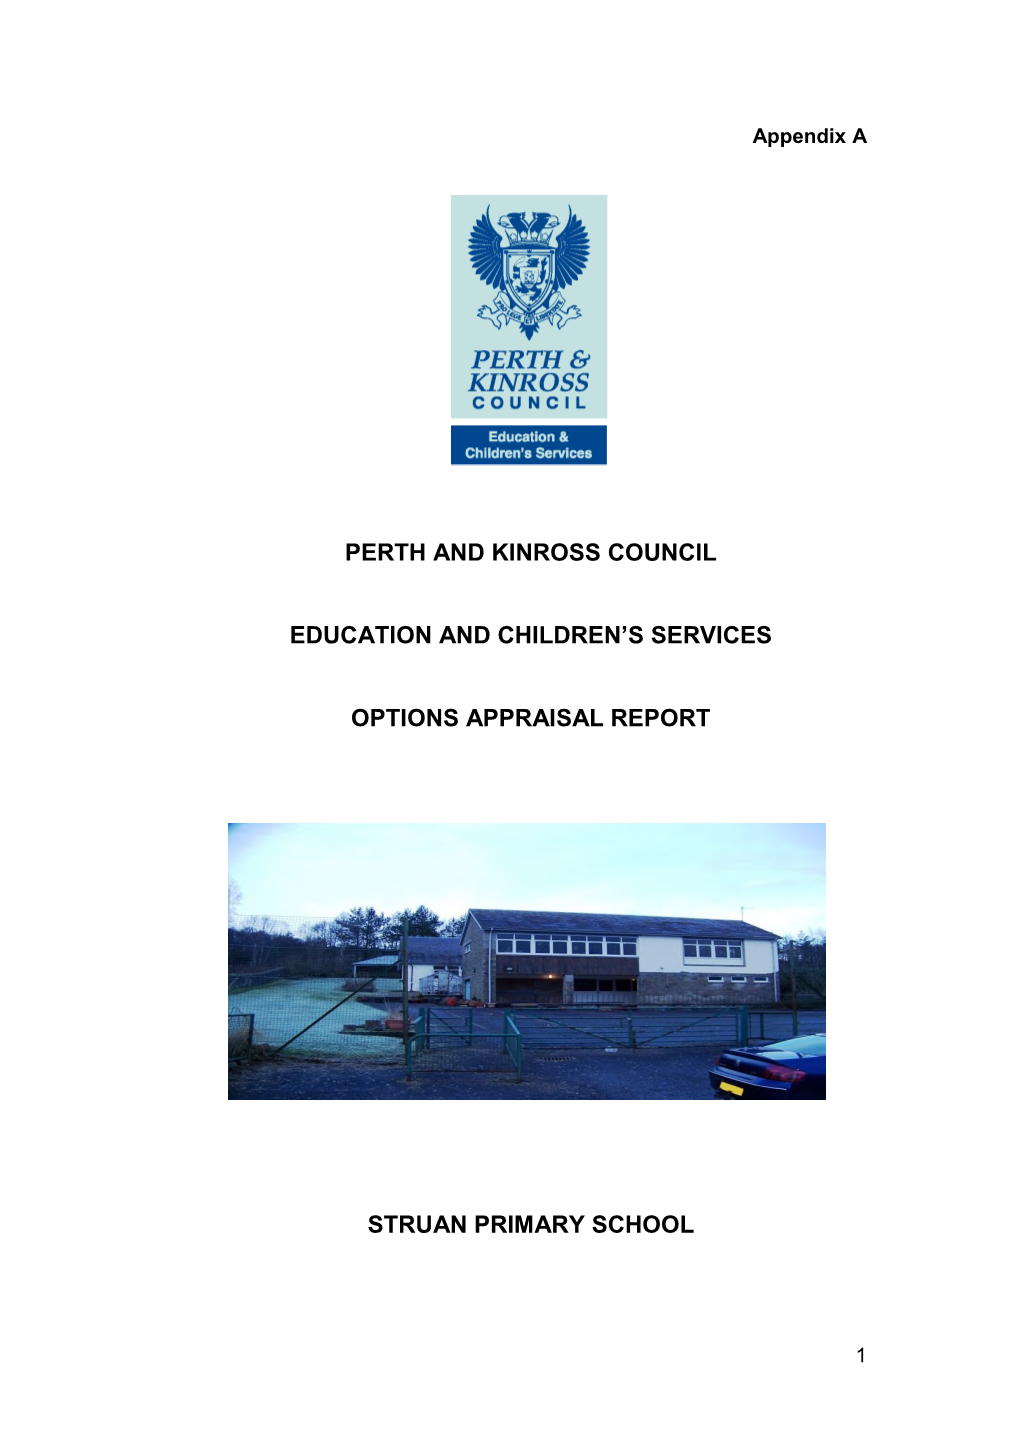 Perth and Kinross Council Education and Children's